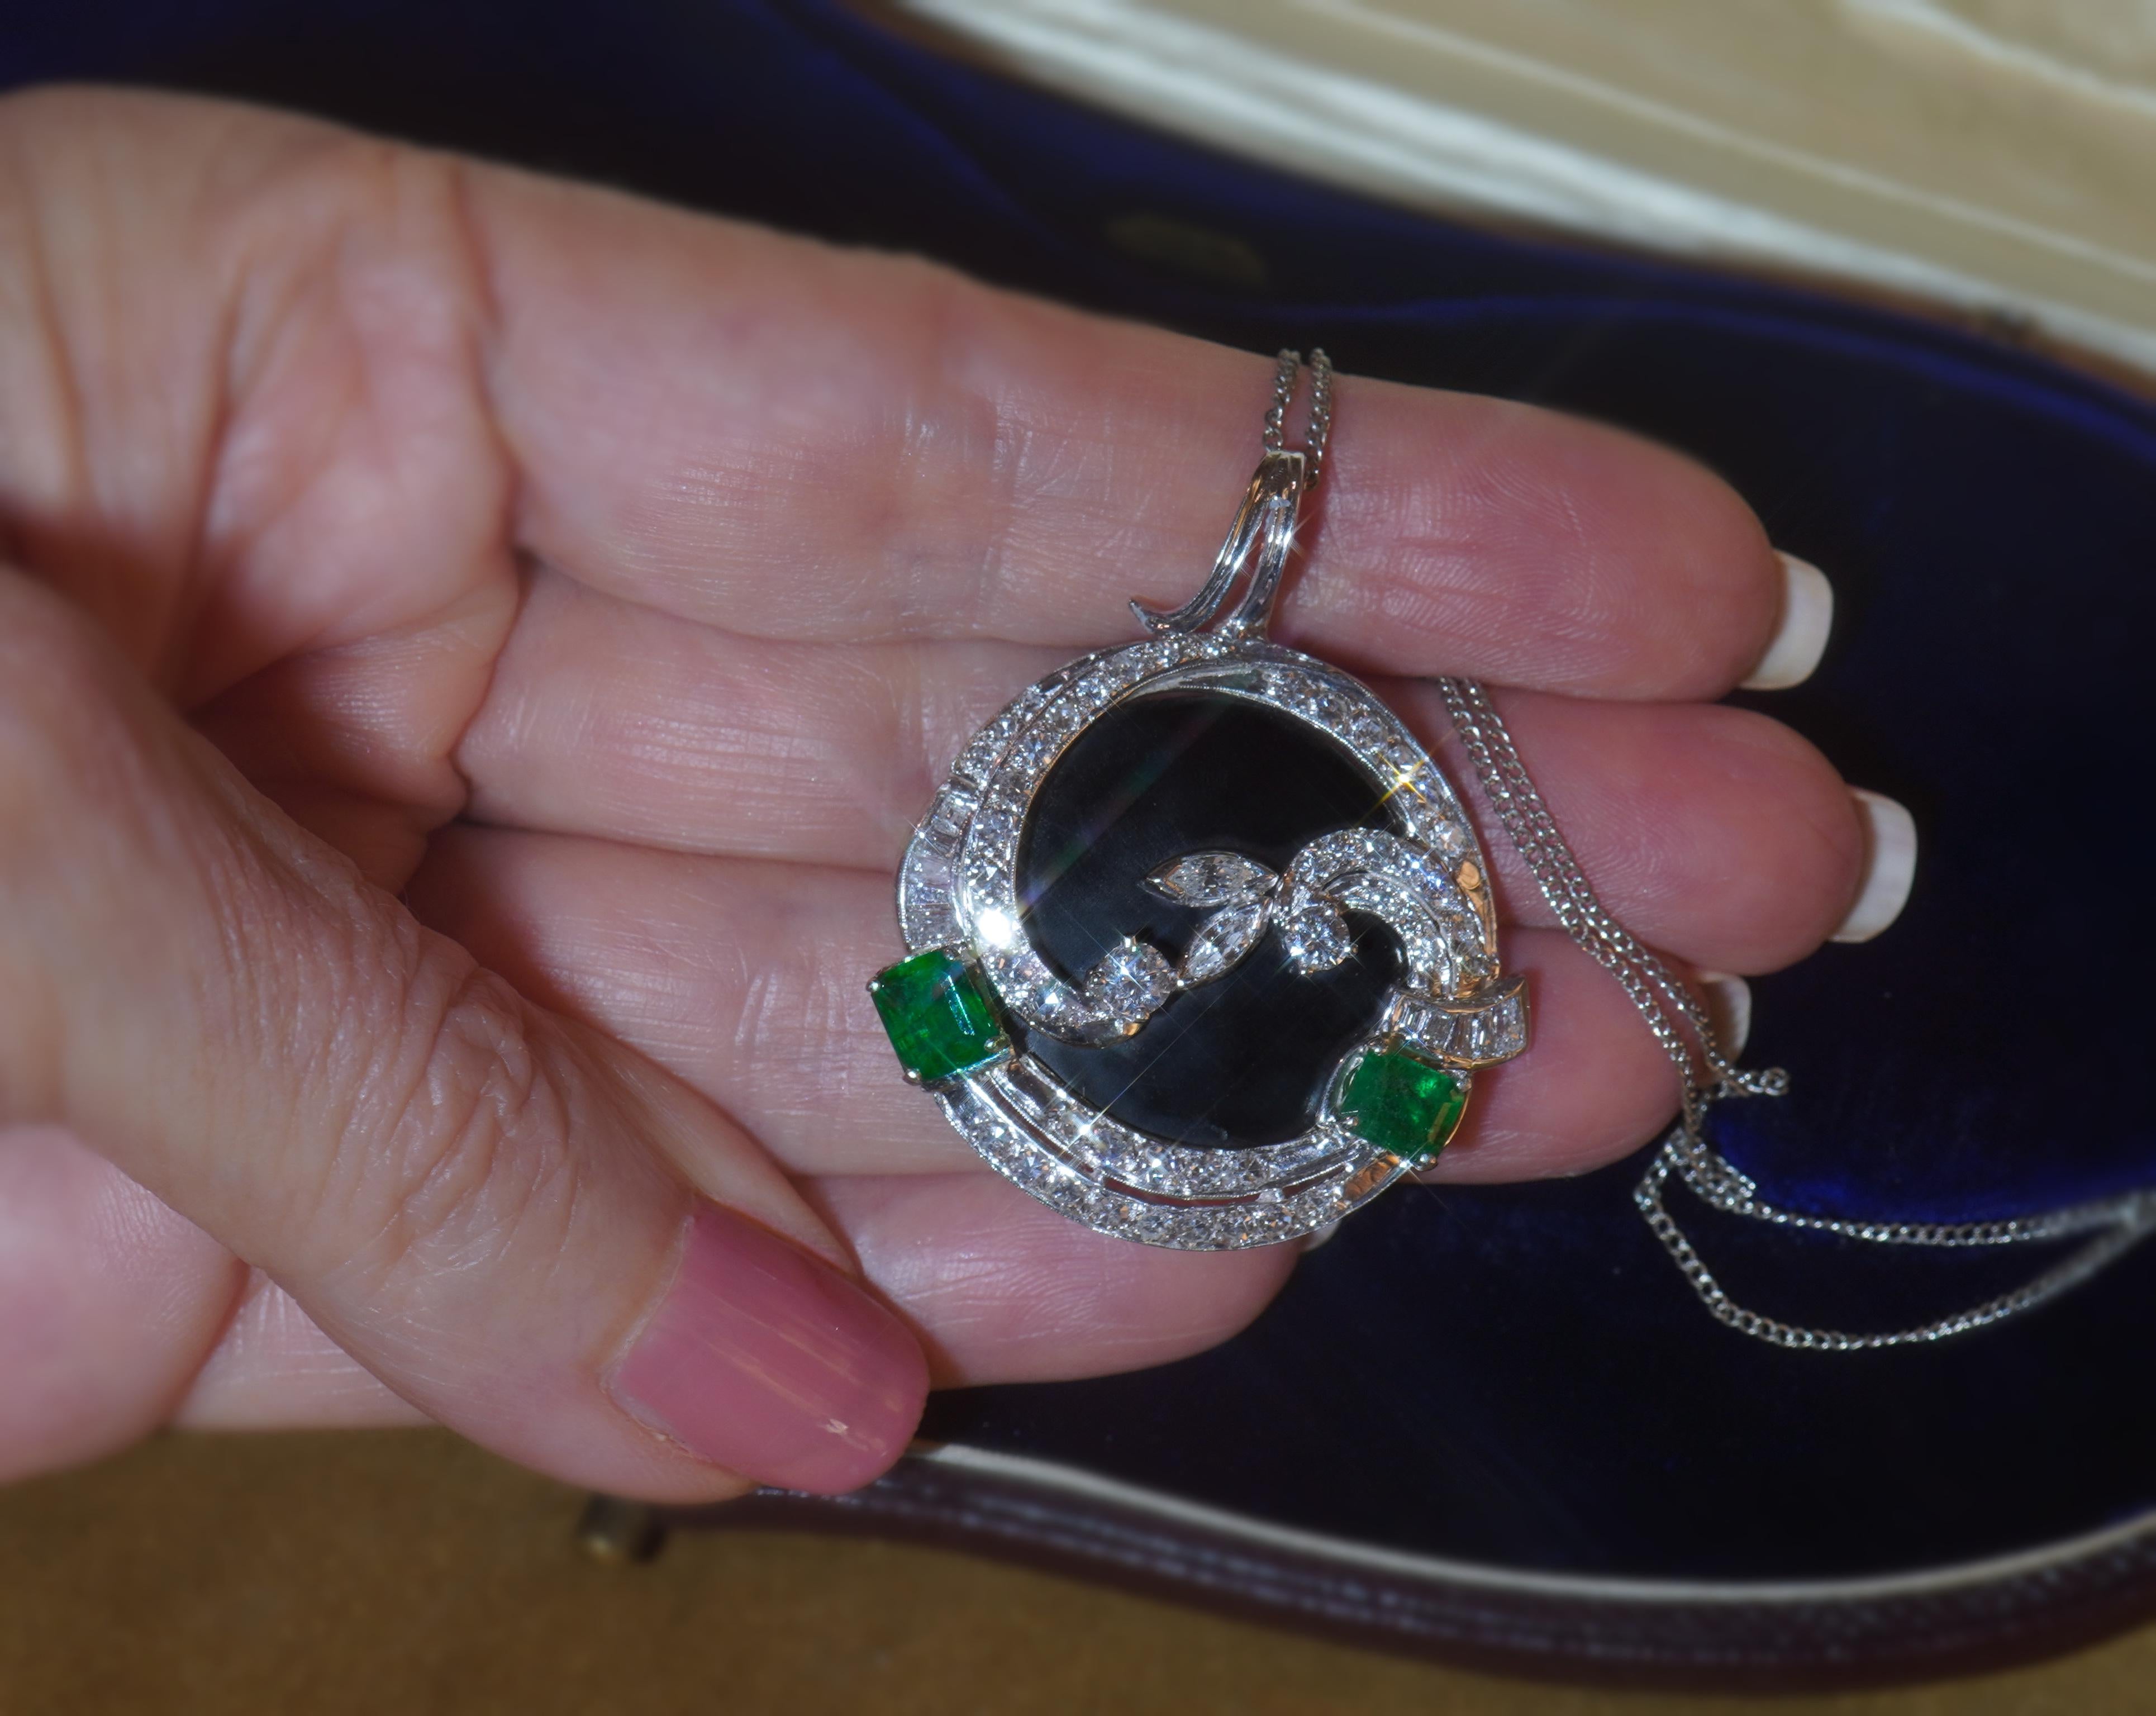 Old South Jewels proudly  presents LUXURY HUGE GIA CERTIFIED 4.51 CARAT GREEN RUSSIAN EMERALD, ONYX, AND EUROPEAN DIAMOND NECKLACE & BOX!    RARE LUXURIOUS ANTIQUE COVERED IN FINEST BRILLIANT EMERALDS AND DIAMONDS.  2.02 CARATS EXOTIC GREEN